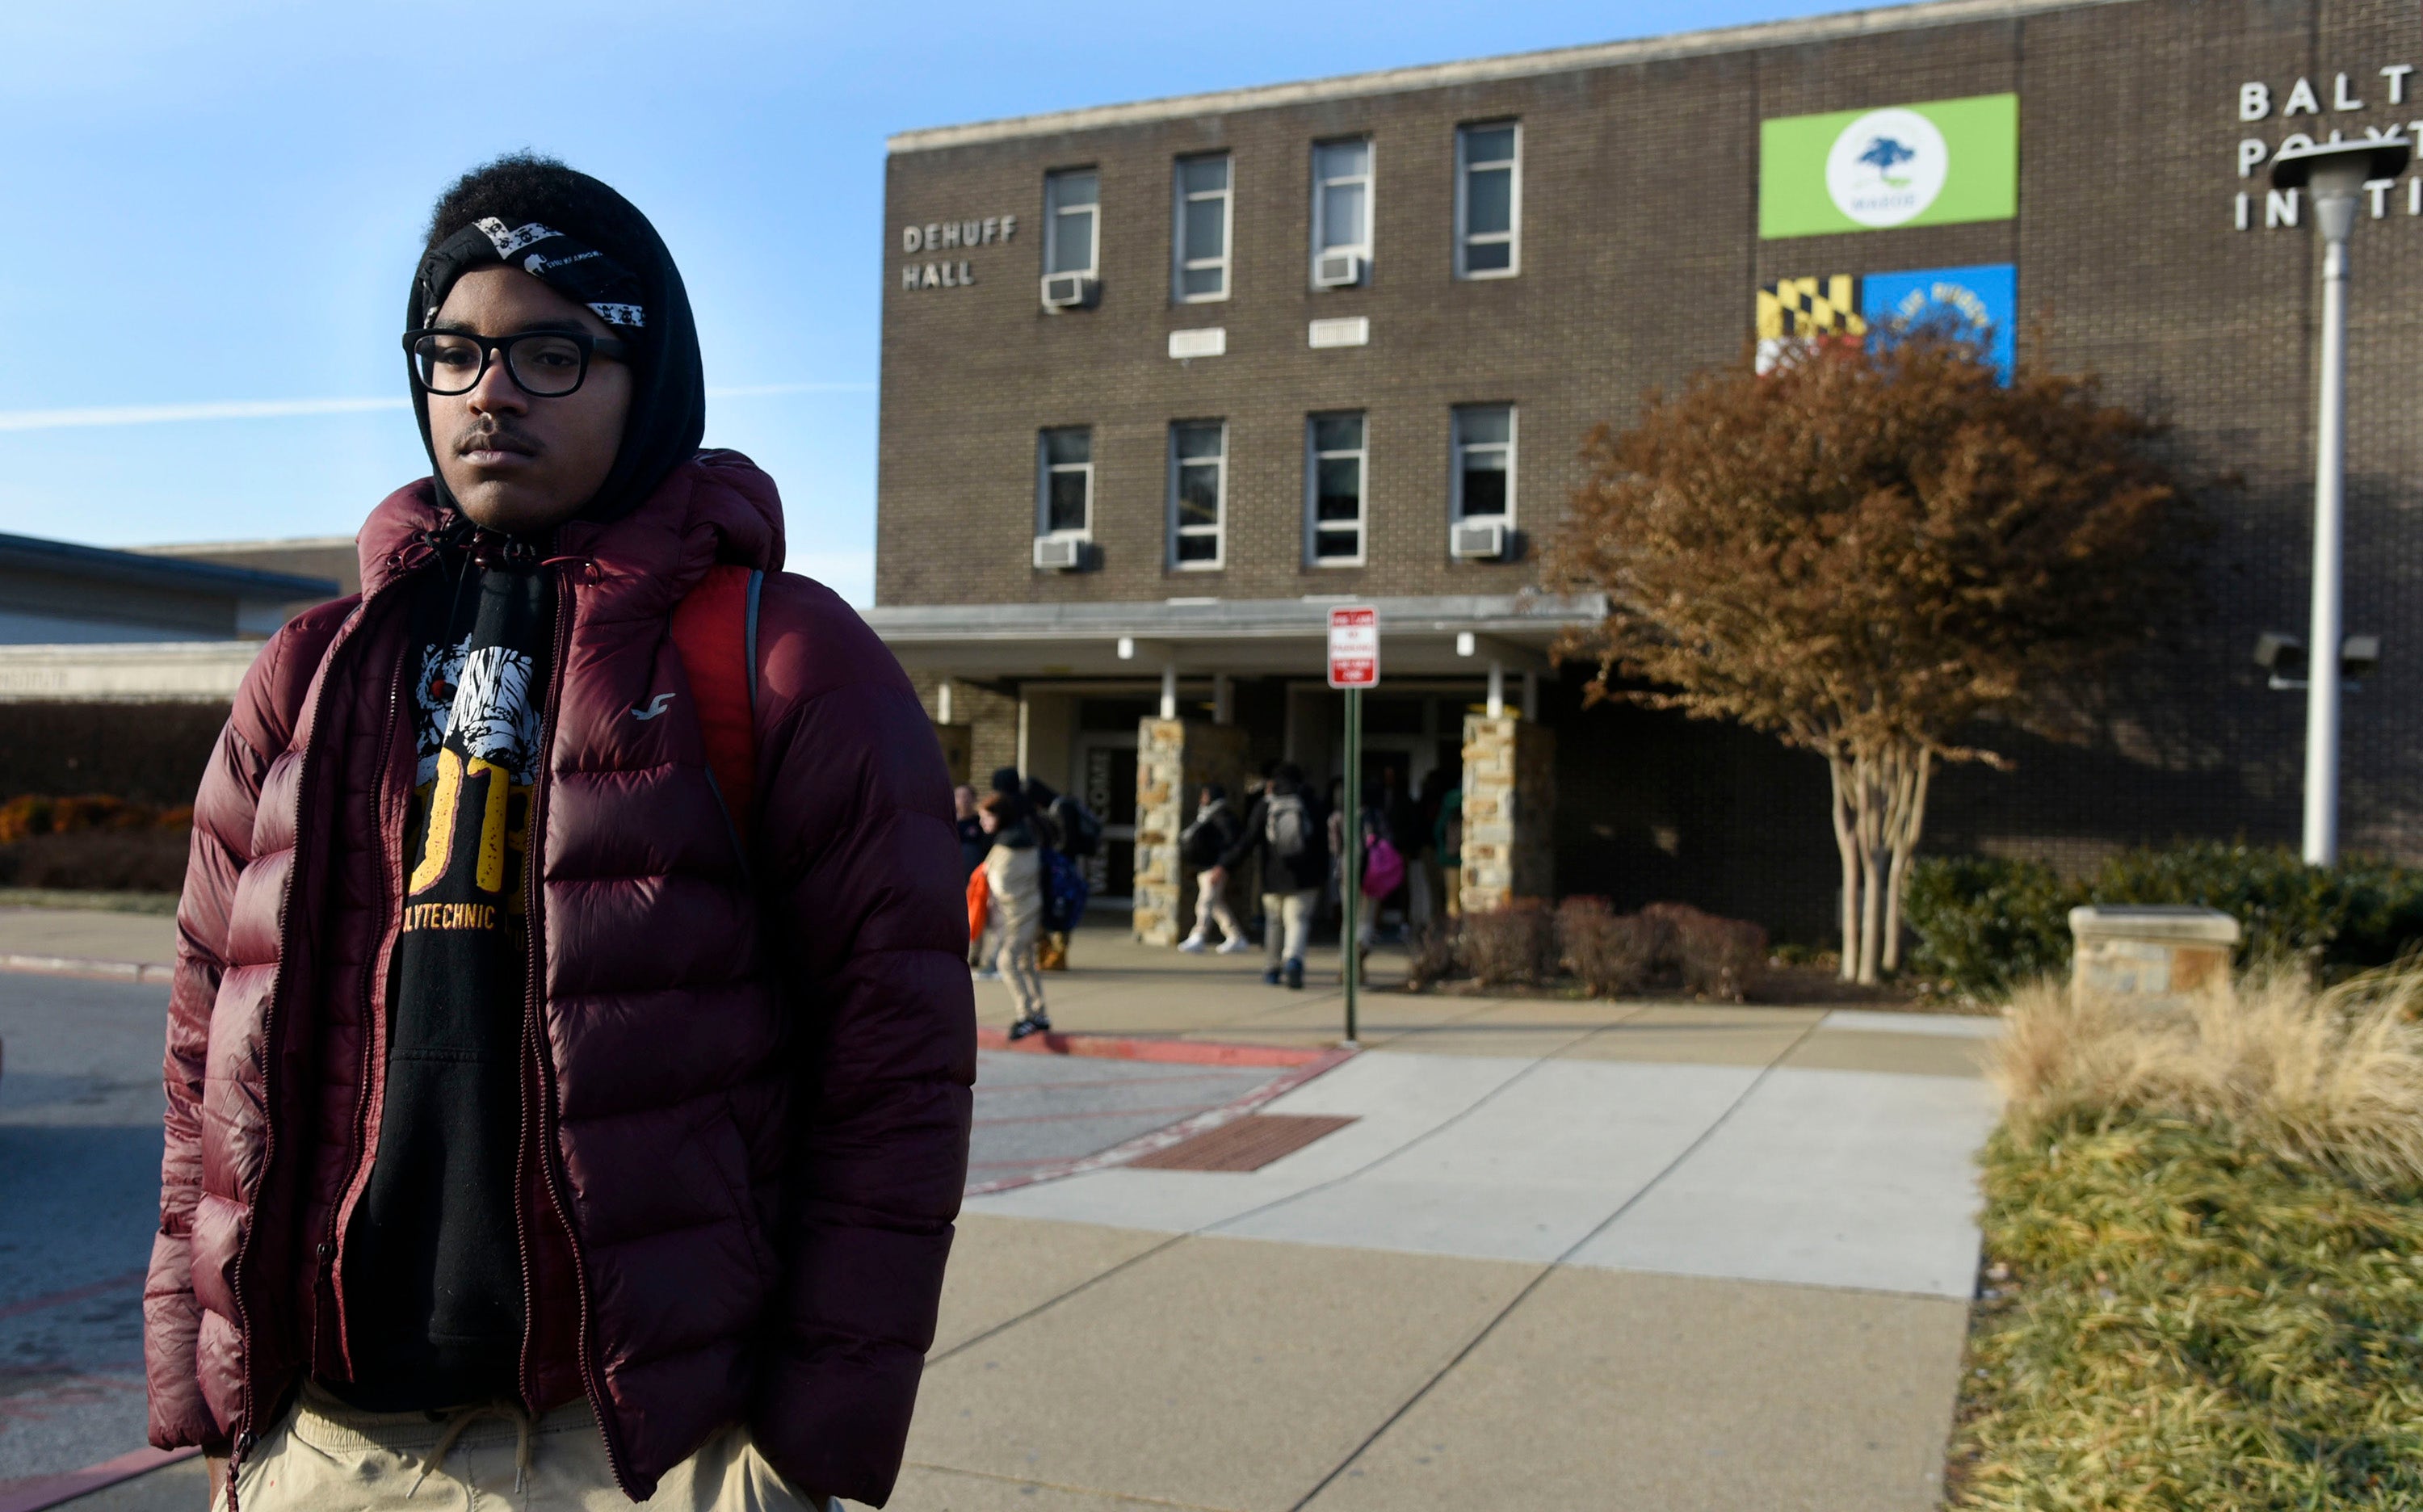 Student stands outside of a Baltimore City high school